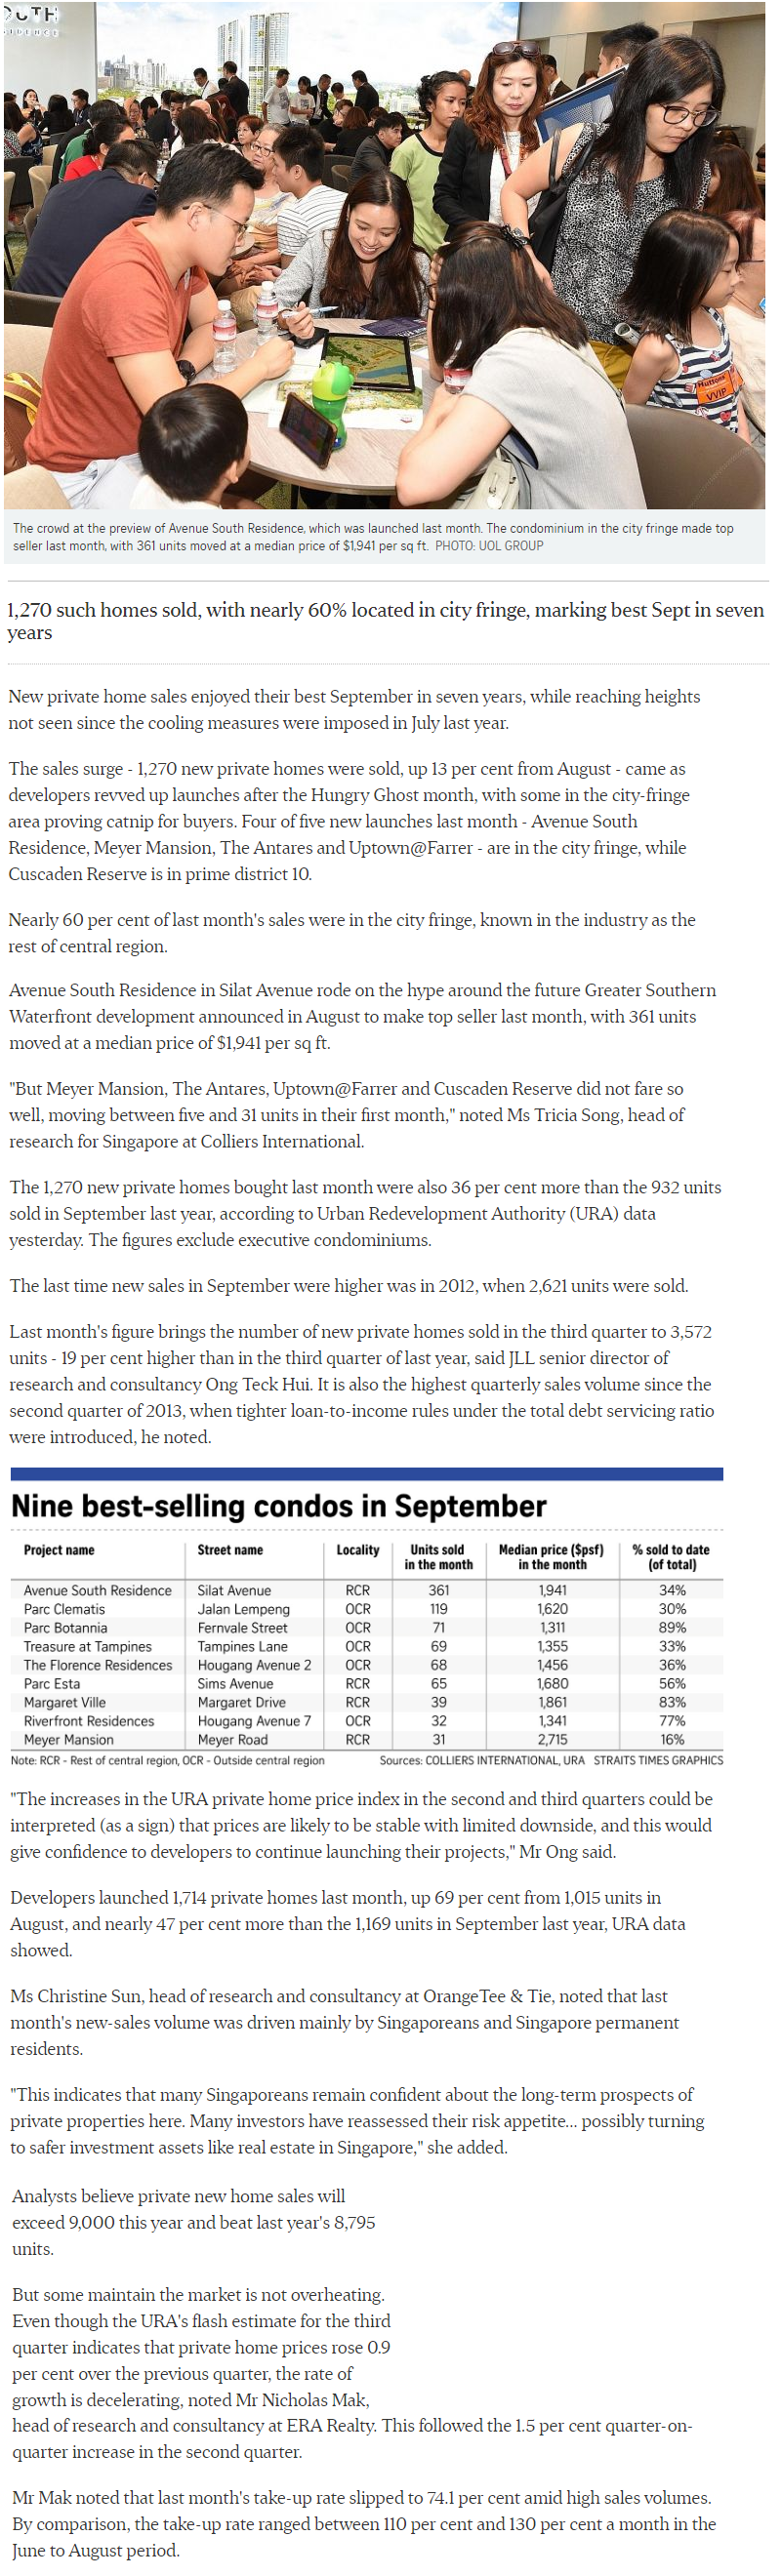 The M - New private Home Sales Hit A Hight In September